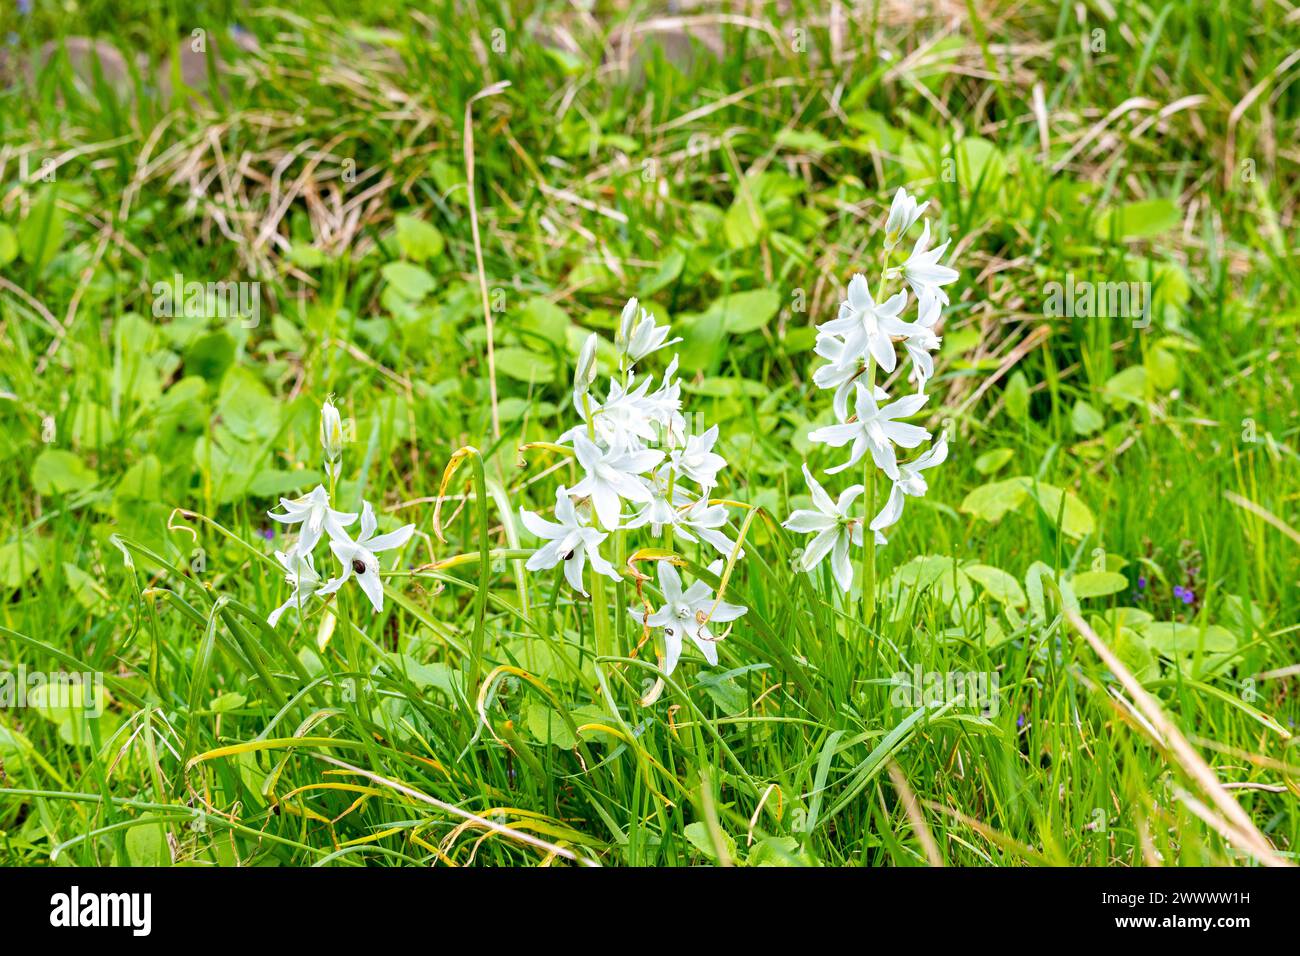 Ornithogalum nutans, known as drooping star-of-Bethlehem,[2] is a species of flowering plant in the family Asparagaceae, Stock Photo